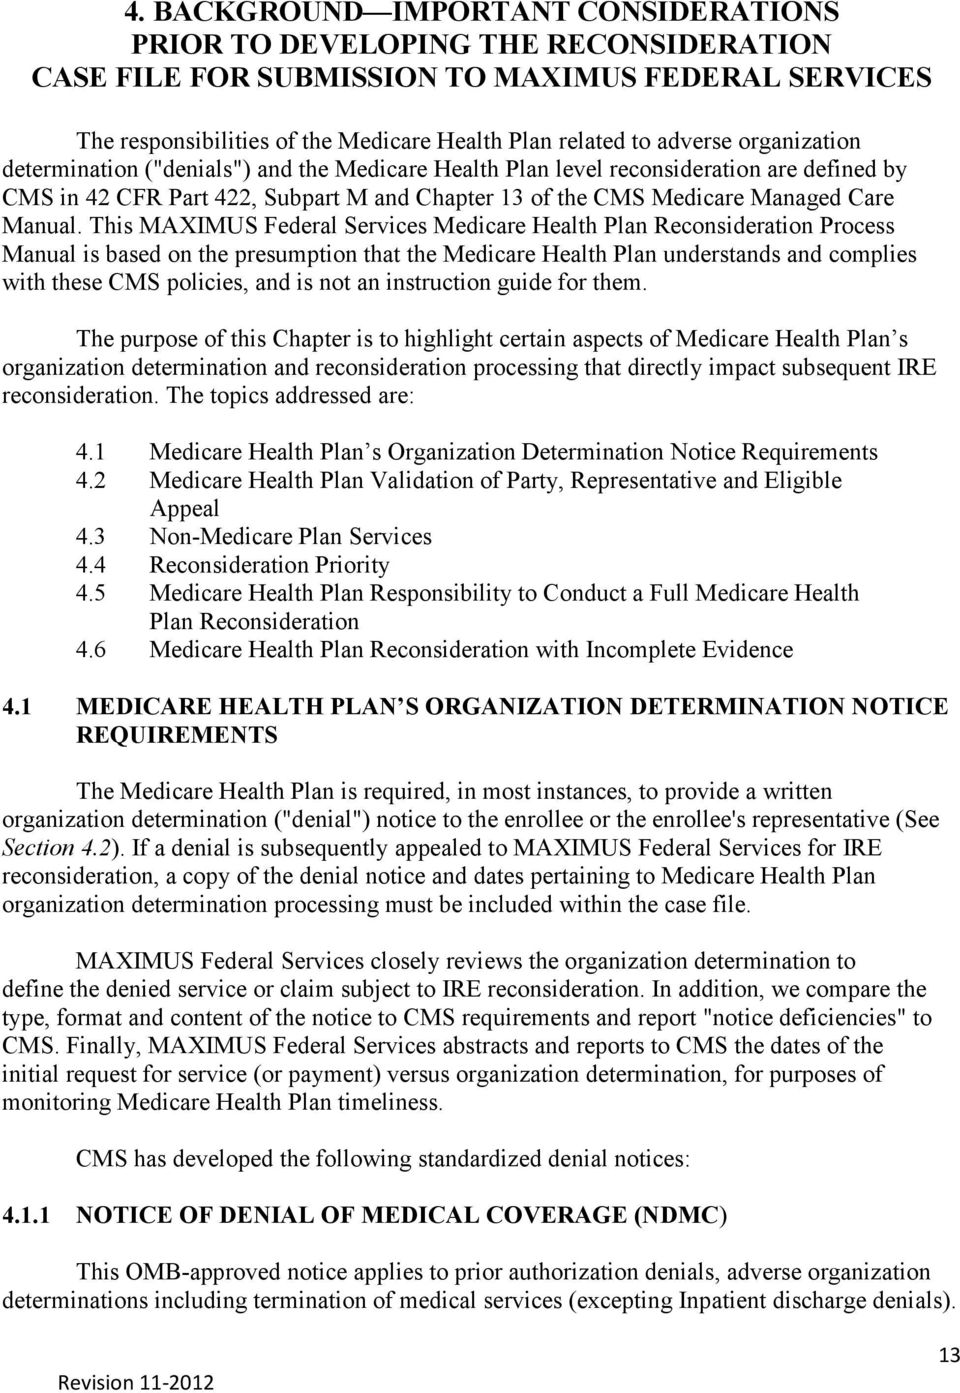 This MAXIMUS Federal Services Medicare Health Plan Reconsideration Process Manual is based on the presumption that the Medicare Health Plan understands and complies with these CMS policies, and is